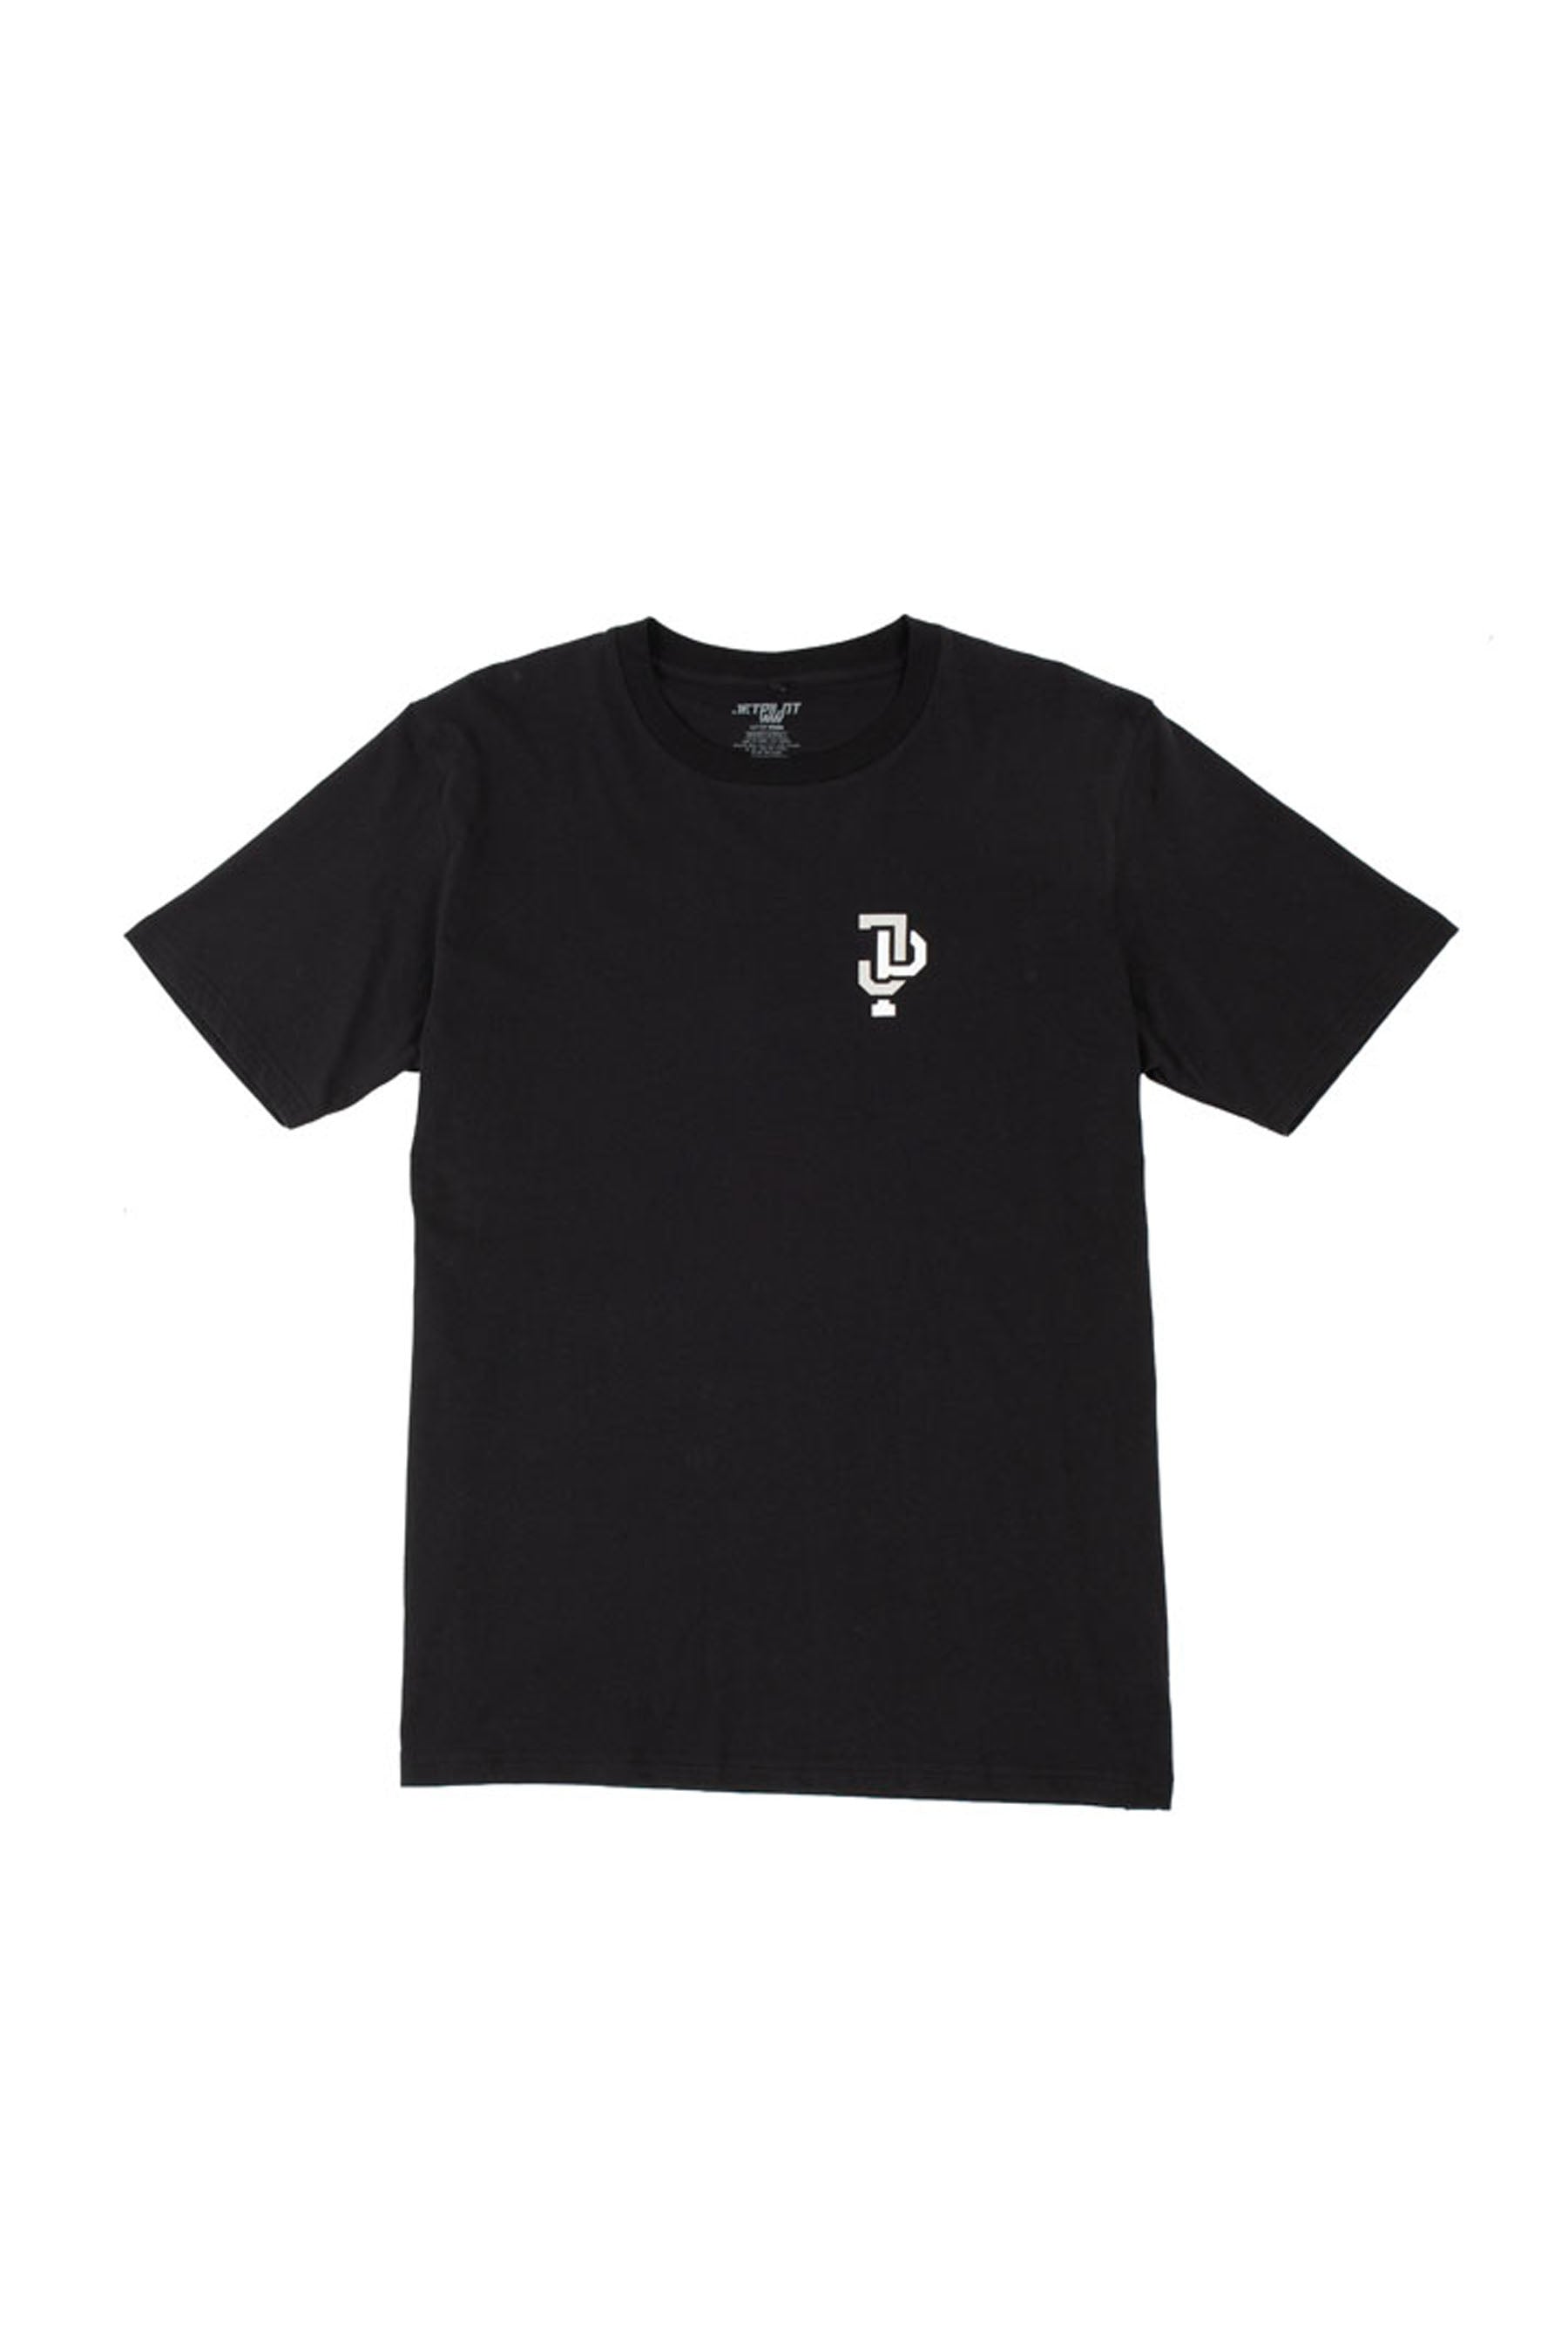 LINKED YOUTH SS TEE